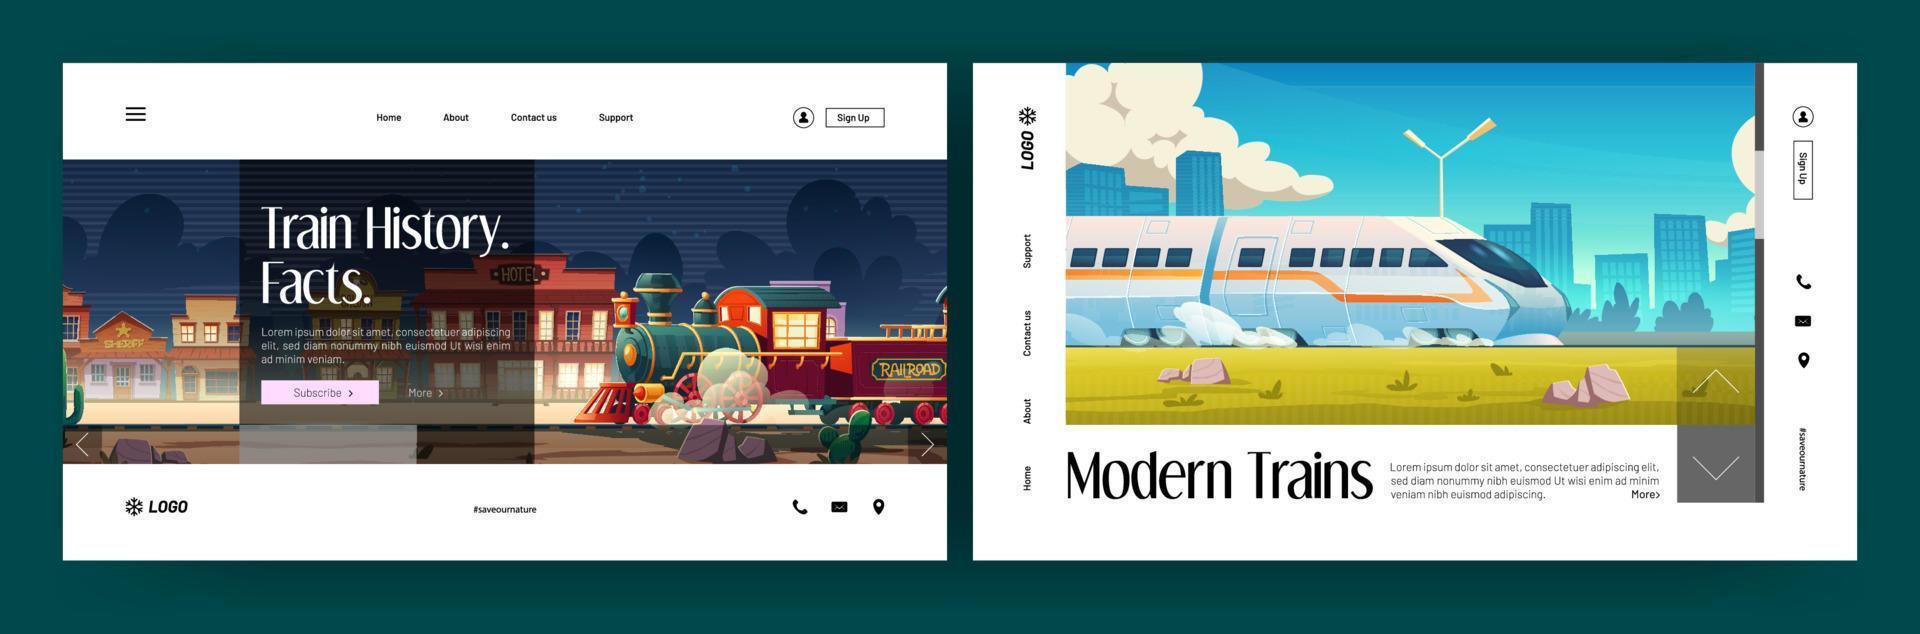 Vector banners with vintage and modern train